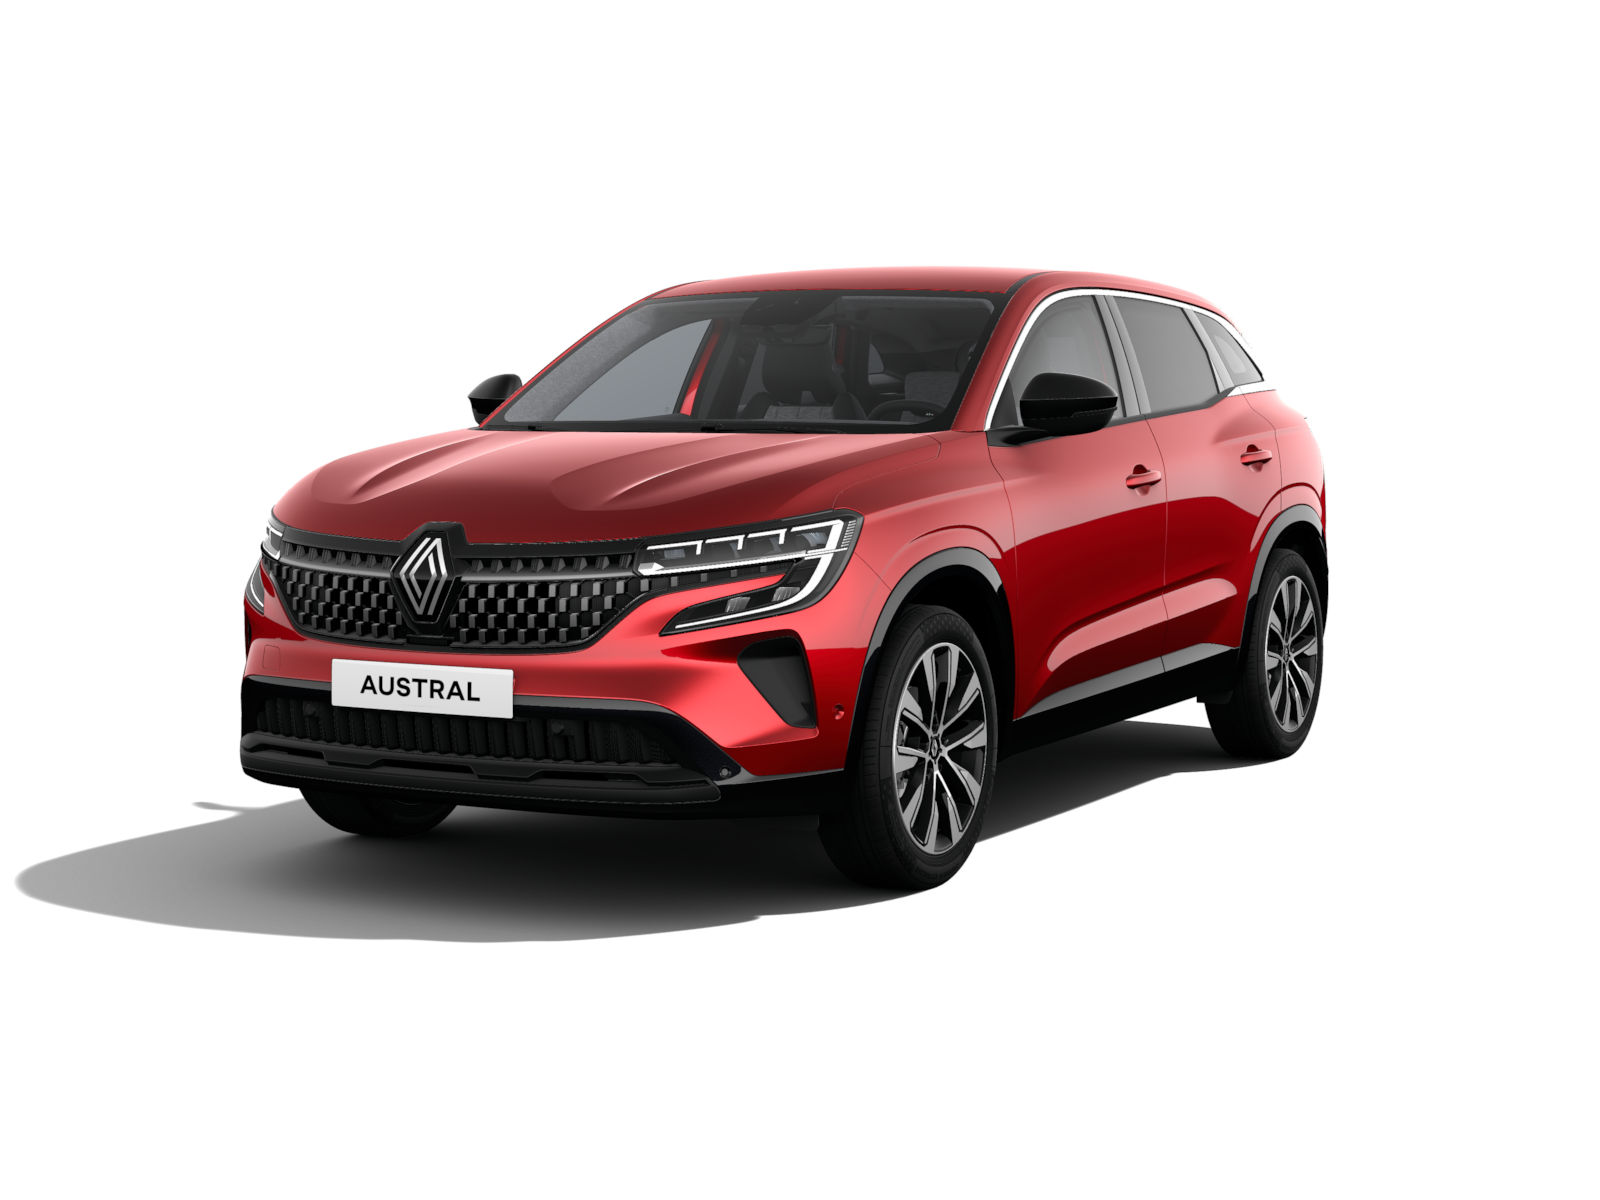 Renault AUSTRAL – rouge flamme